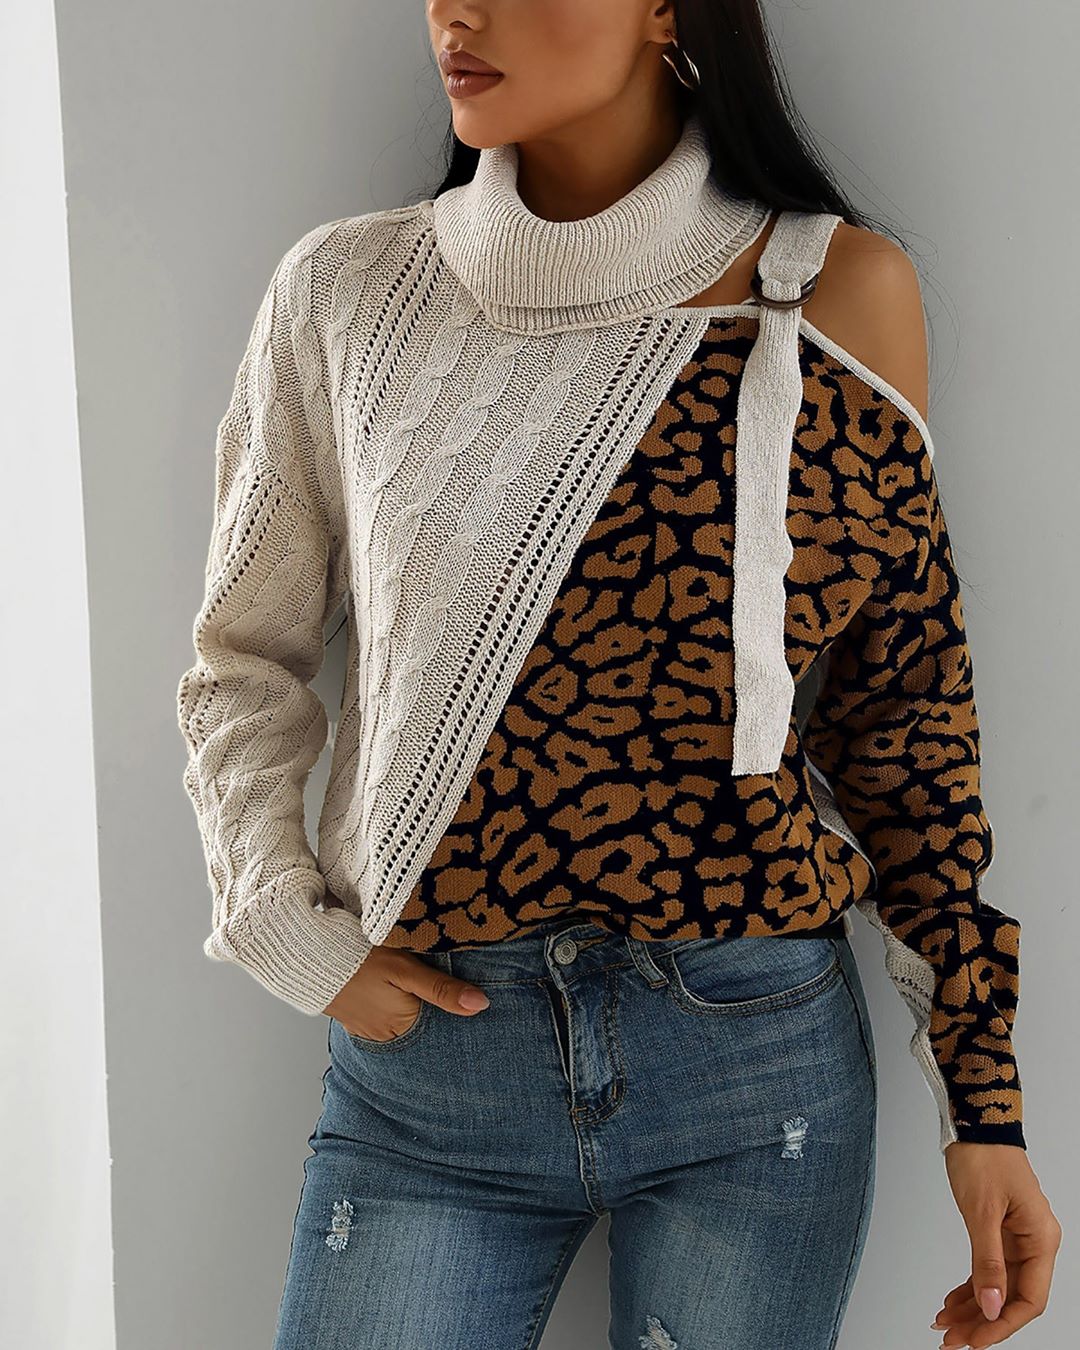 boutiquefeel_official - When leopard print climbs on your sweater..⁠
Go to link in bio to shop!⁠
🔍SKU：ACC1831⁠
Shop:boutiquefeel.com⁠
 #fashion #ootd #style